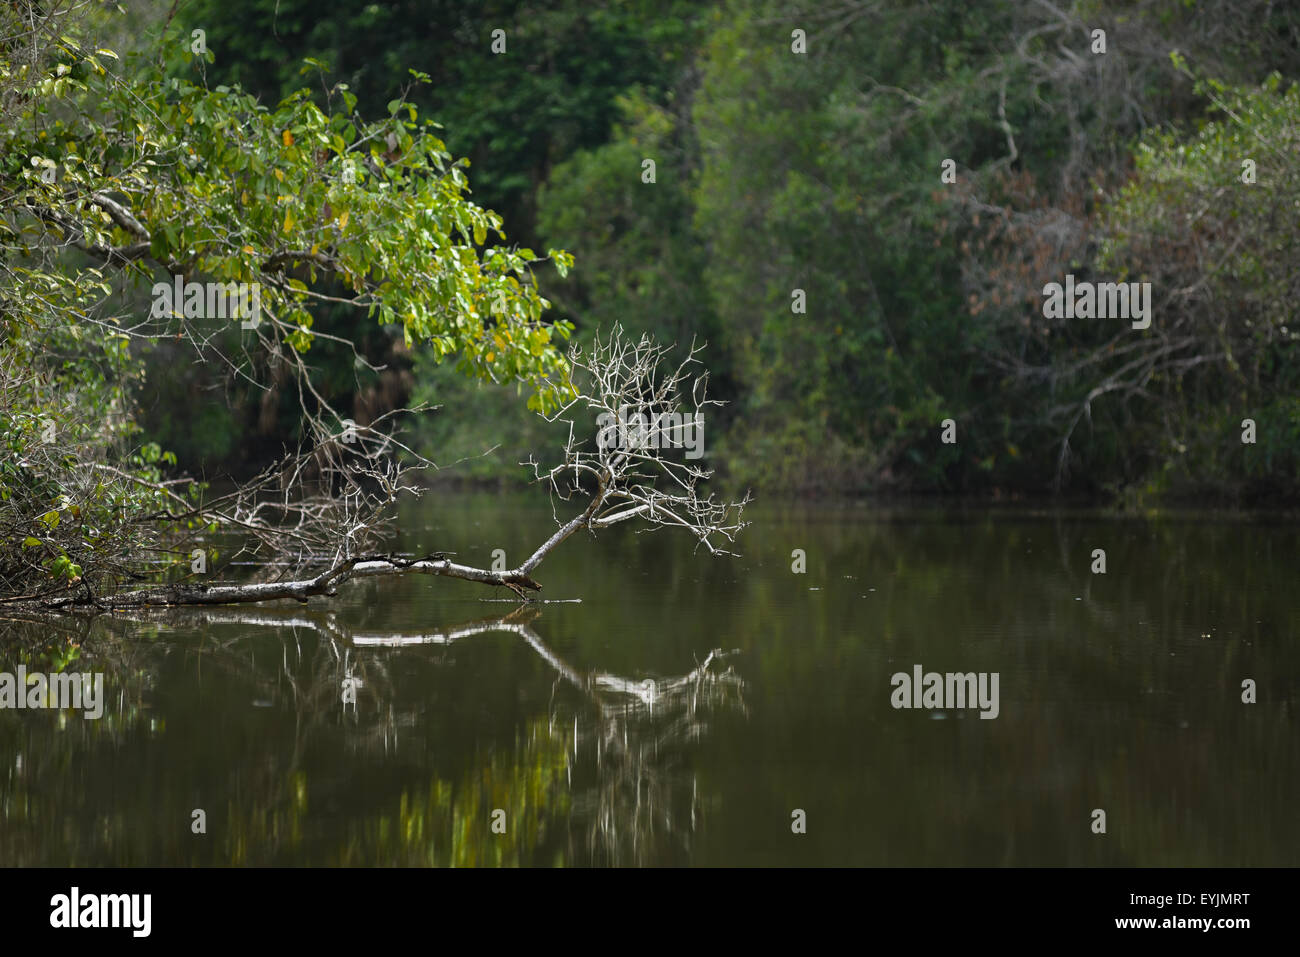 River view of tropical lowland forest. Stock Photo